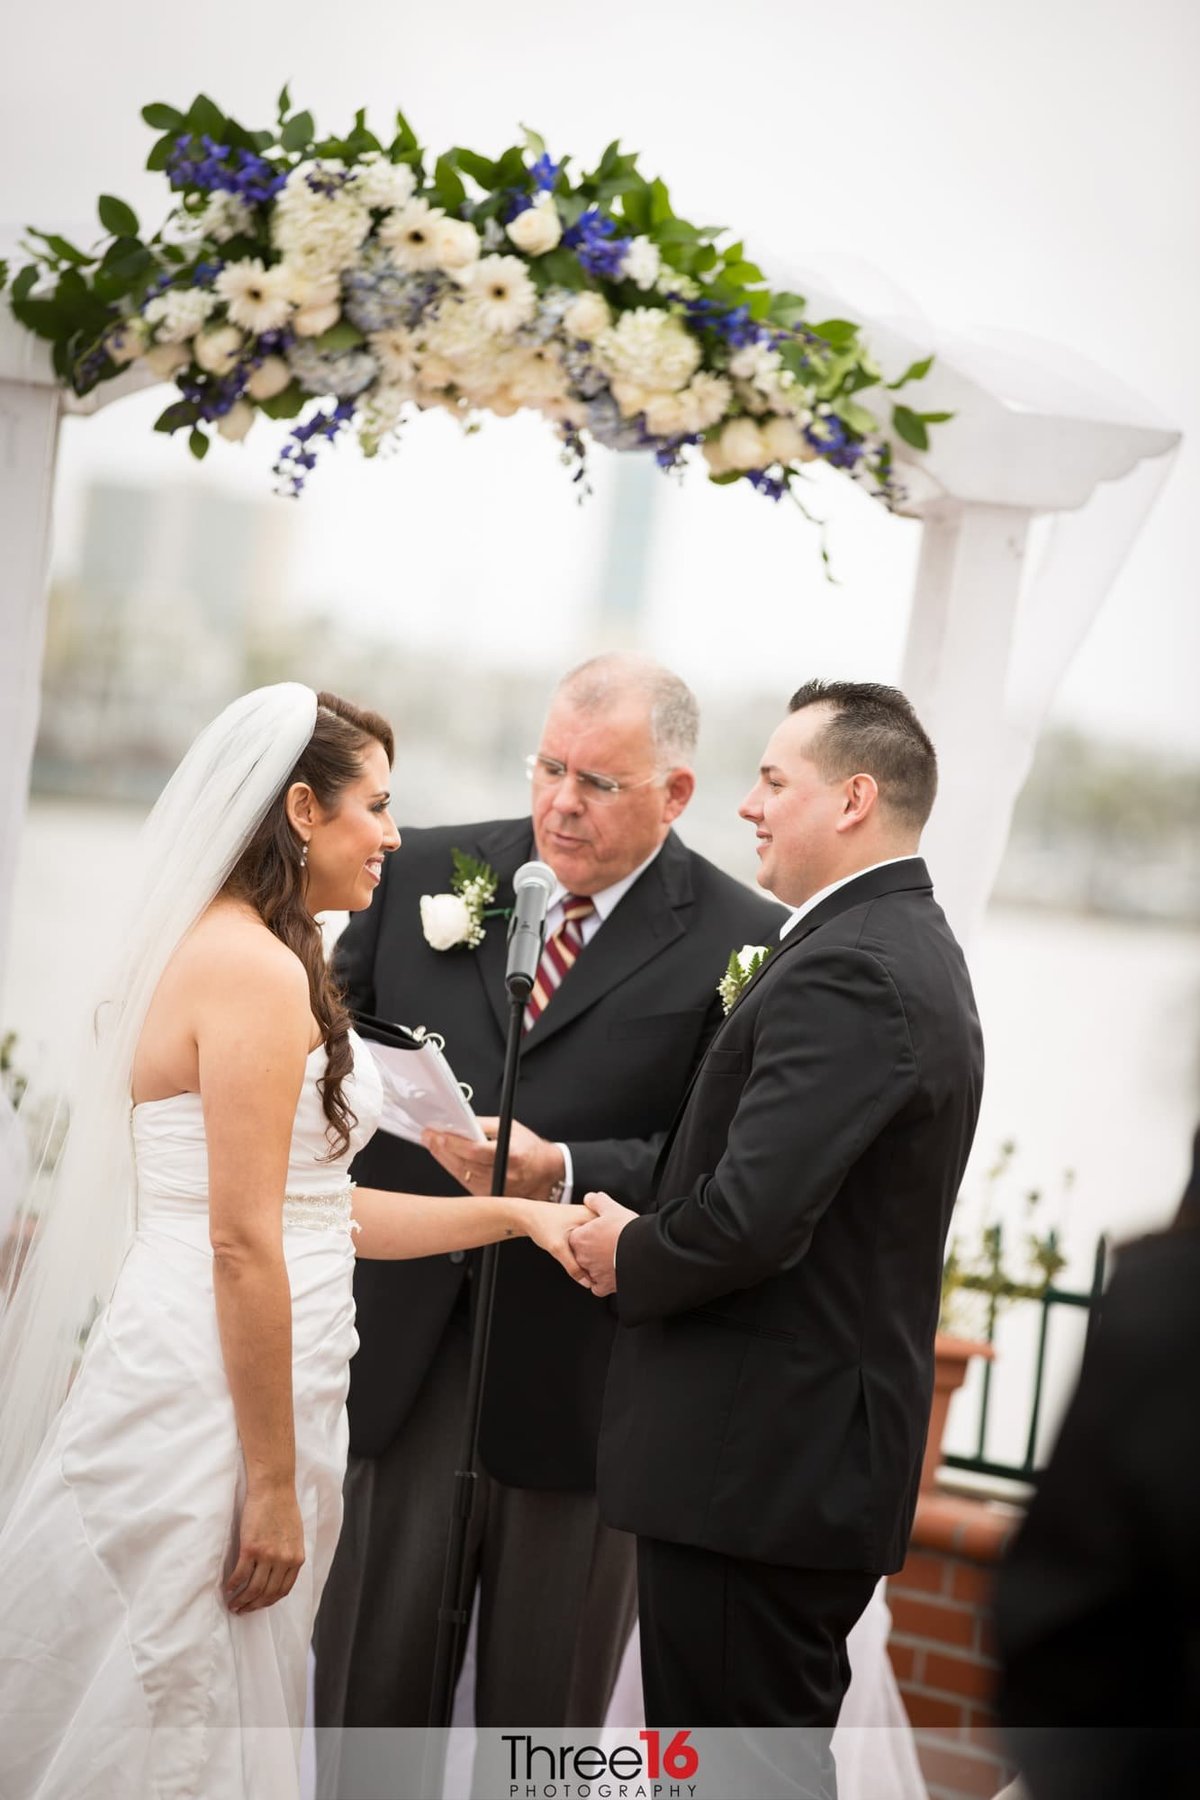 Wedding Ceremony at The Reef in Long Beach